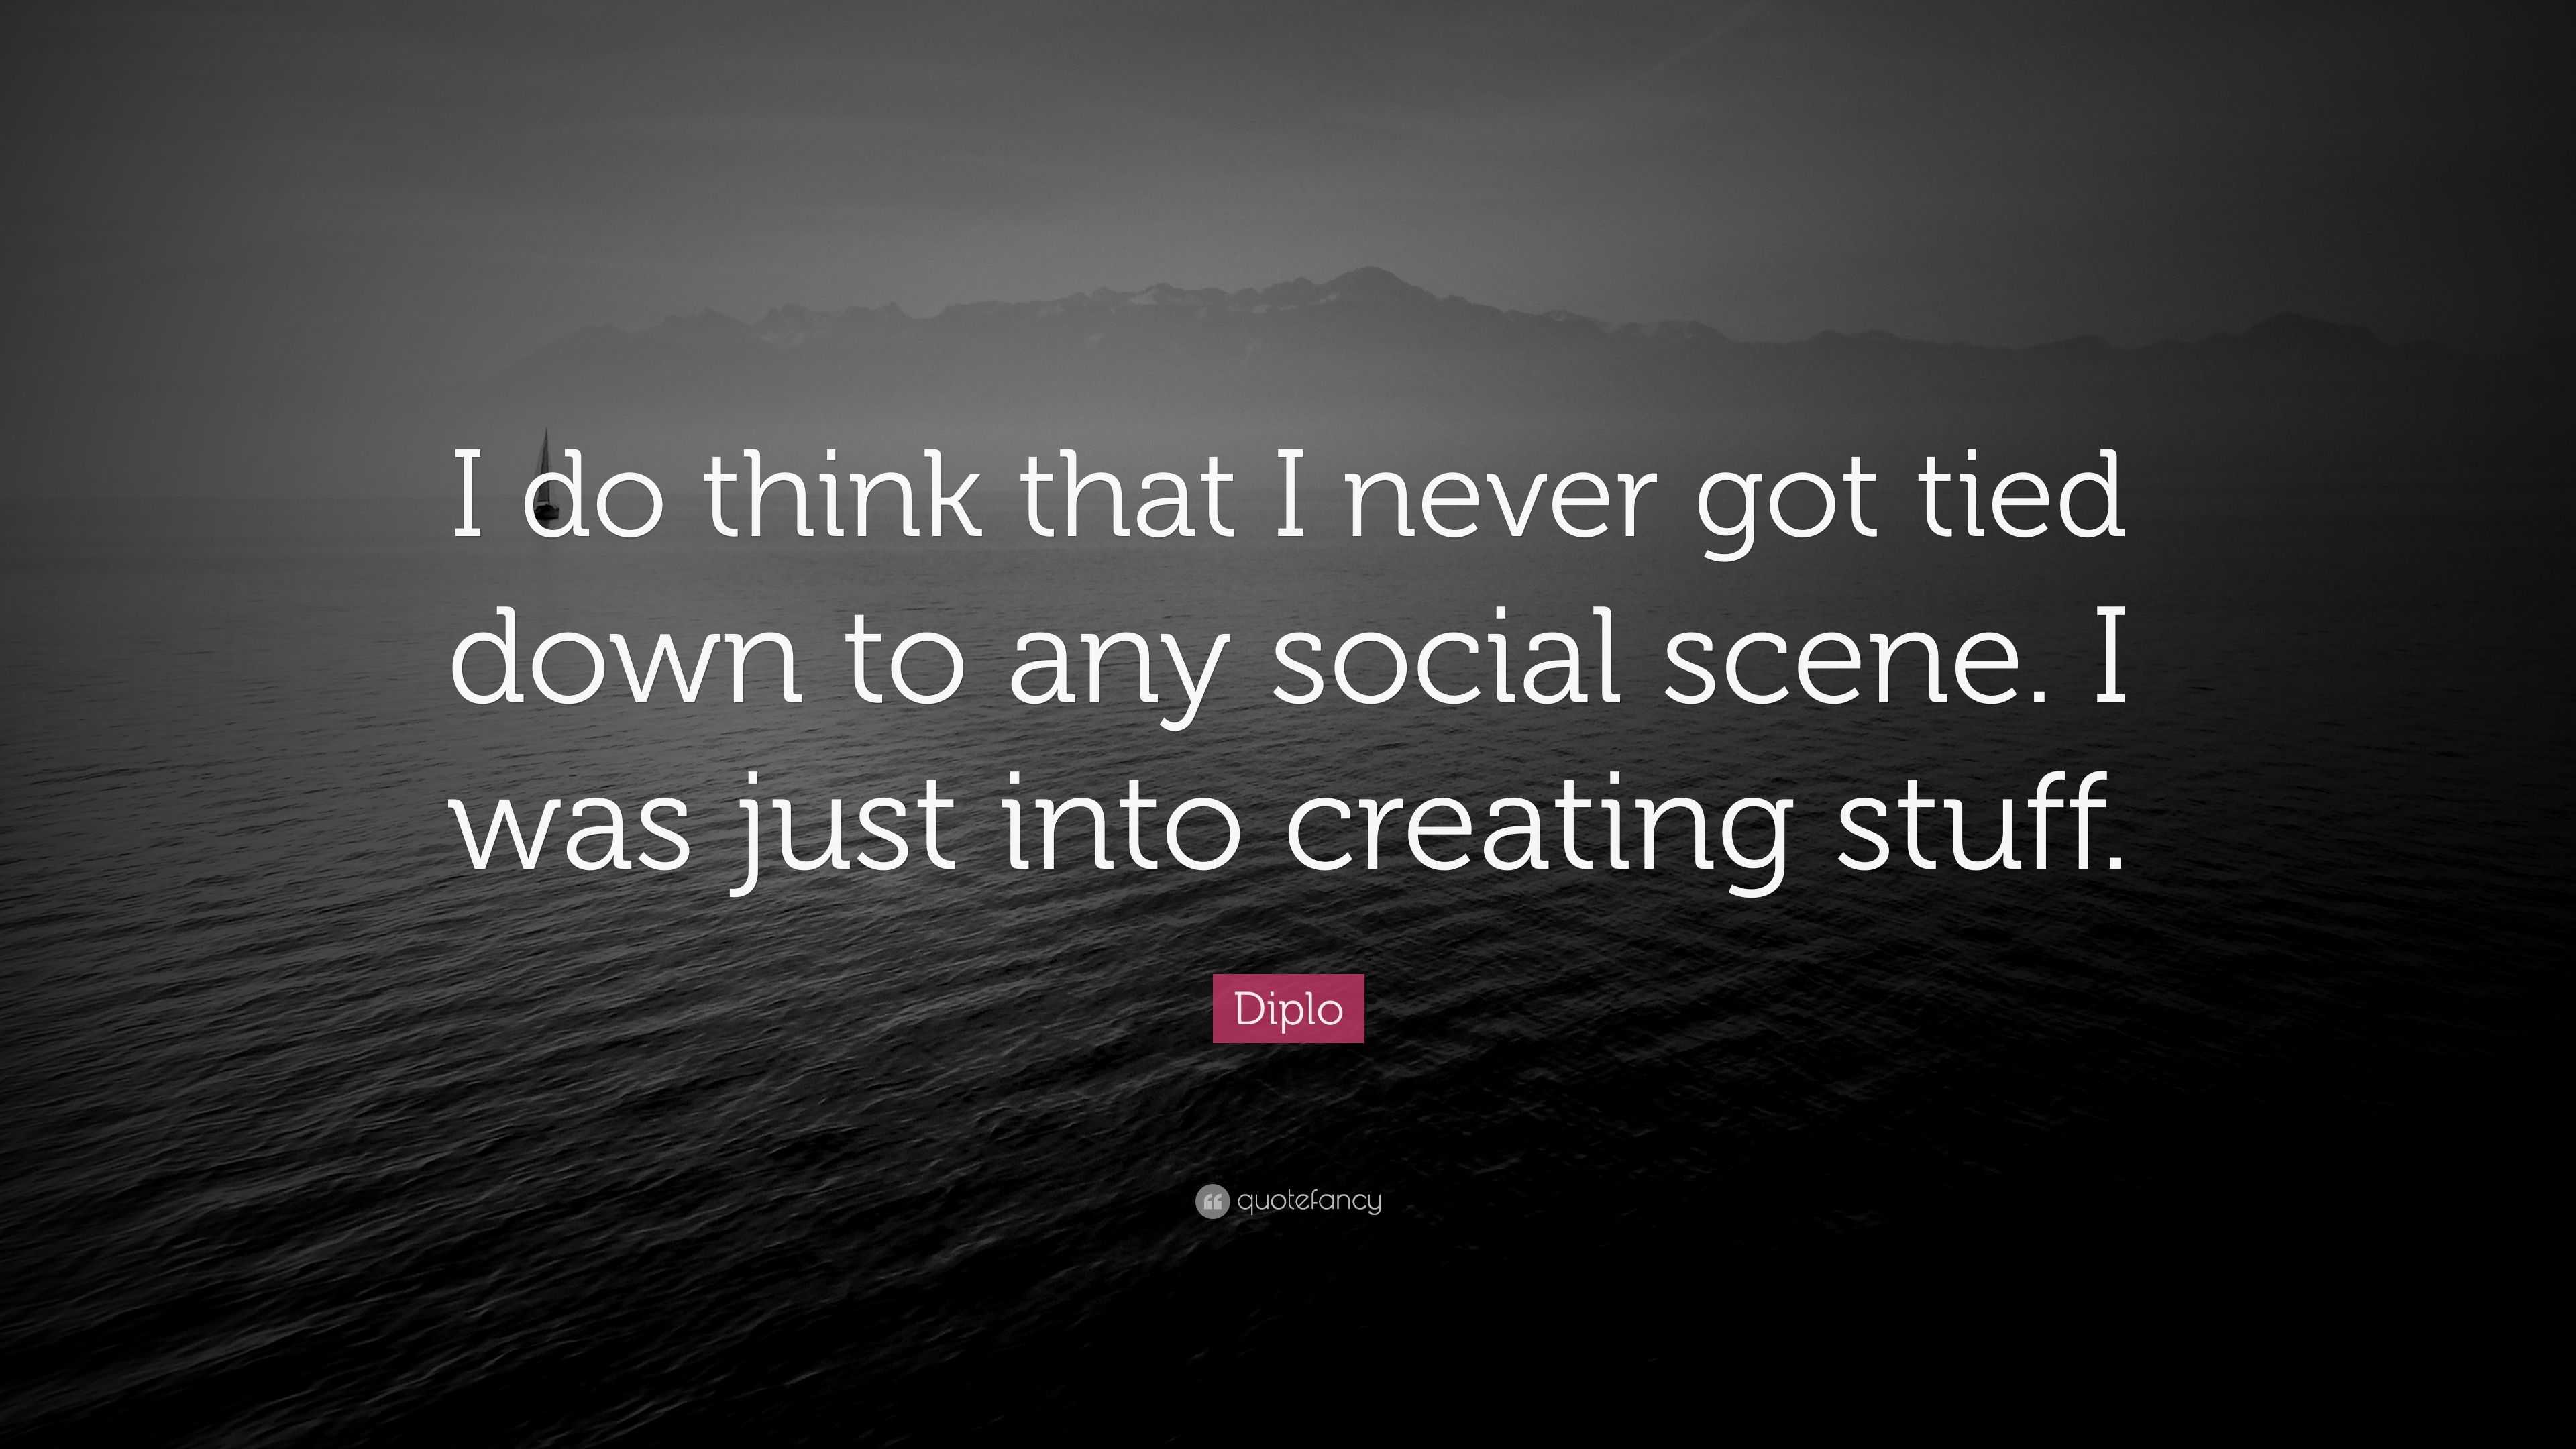 Diplo Quote: “I do think that I never got tied down to any social scene ...